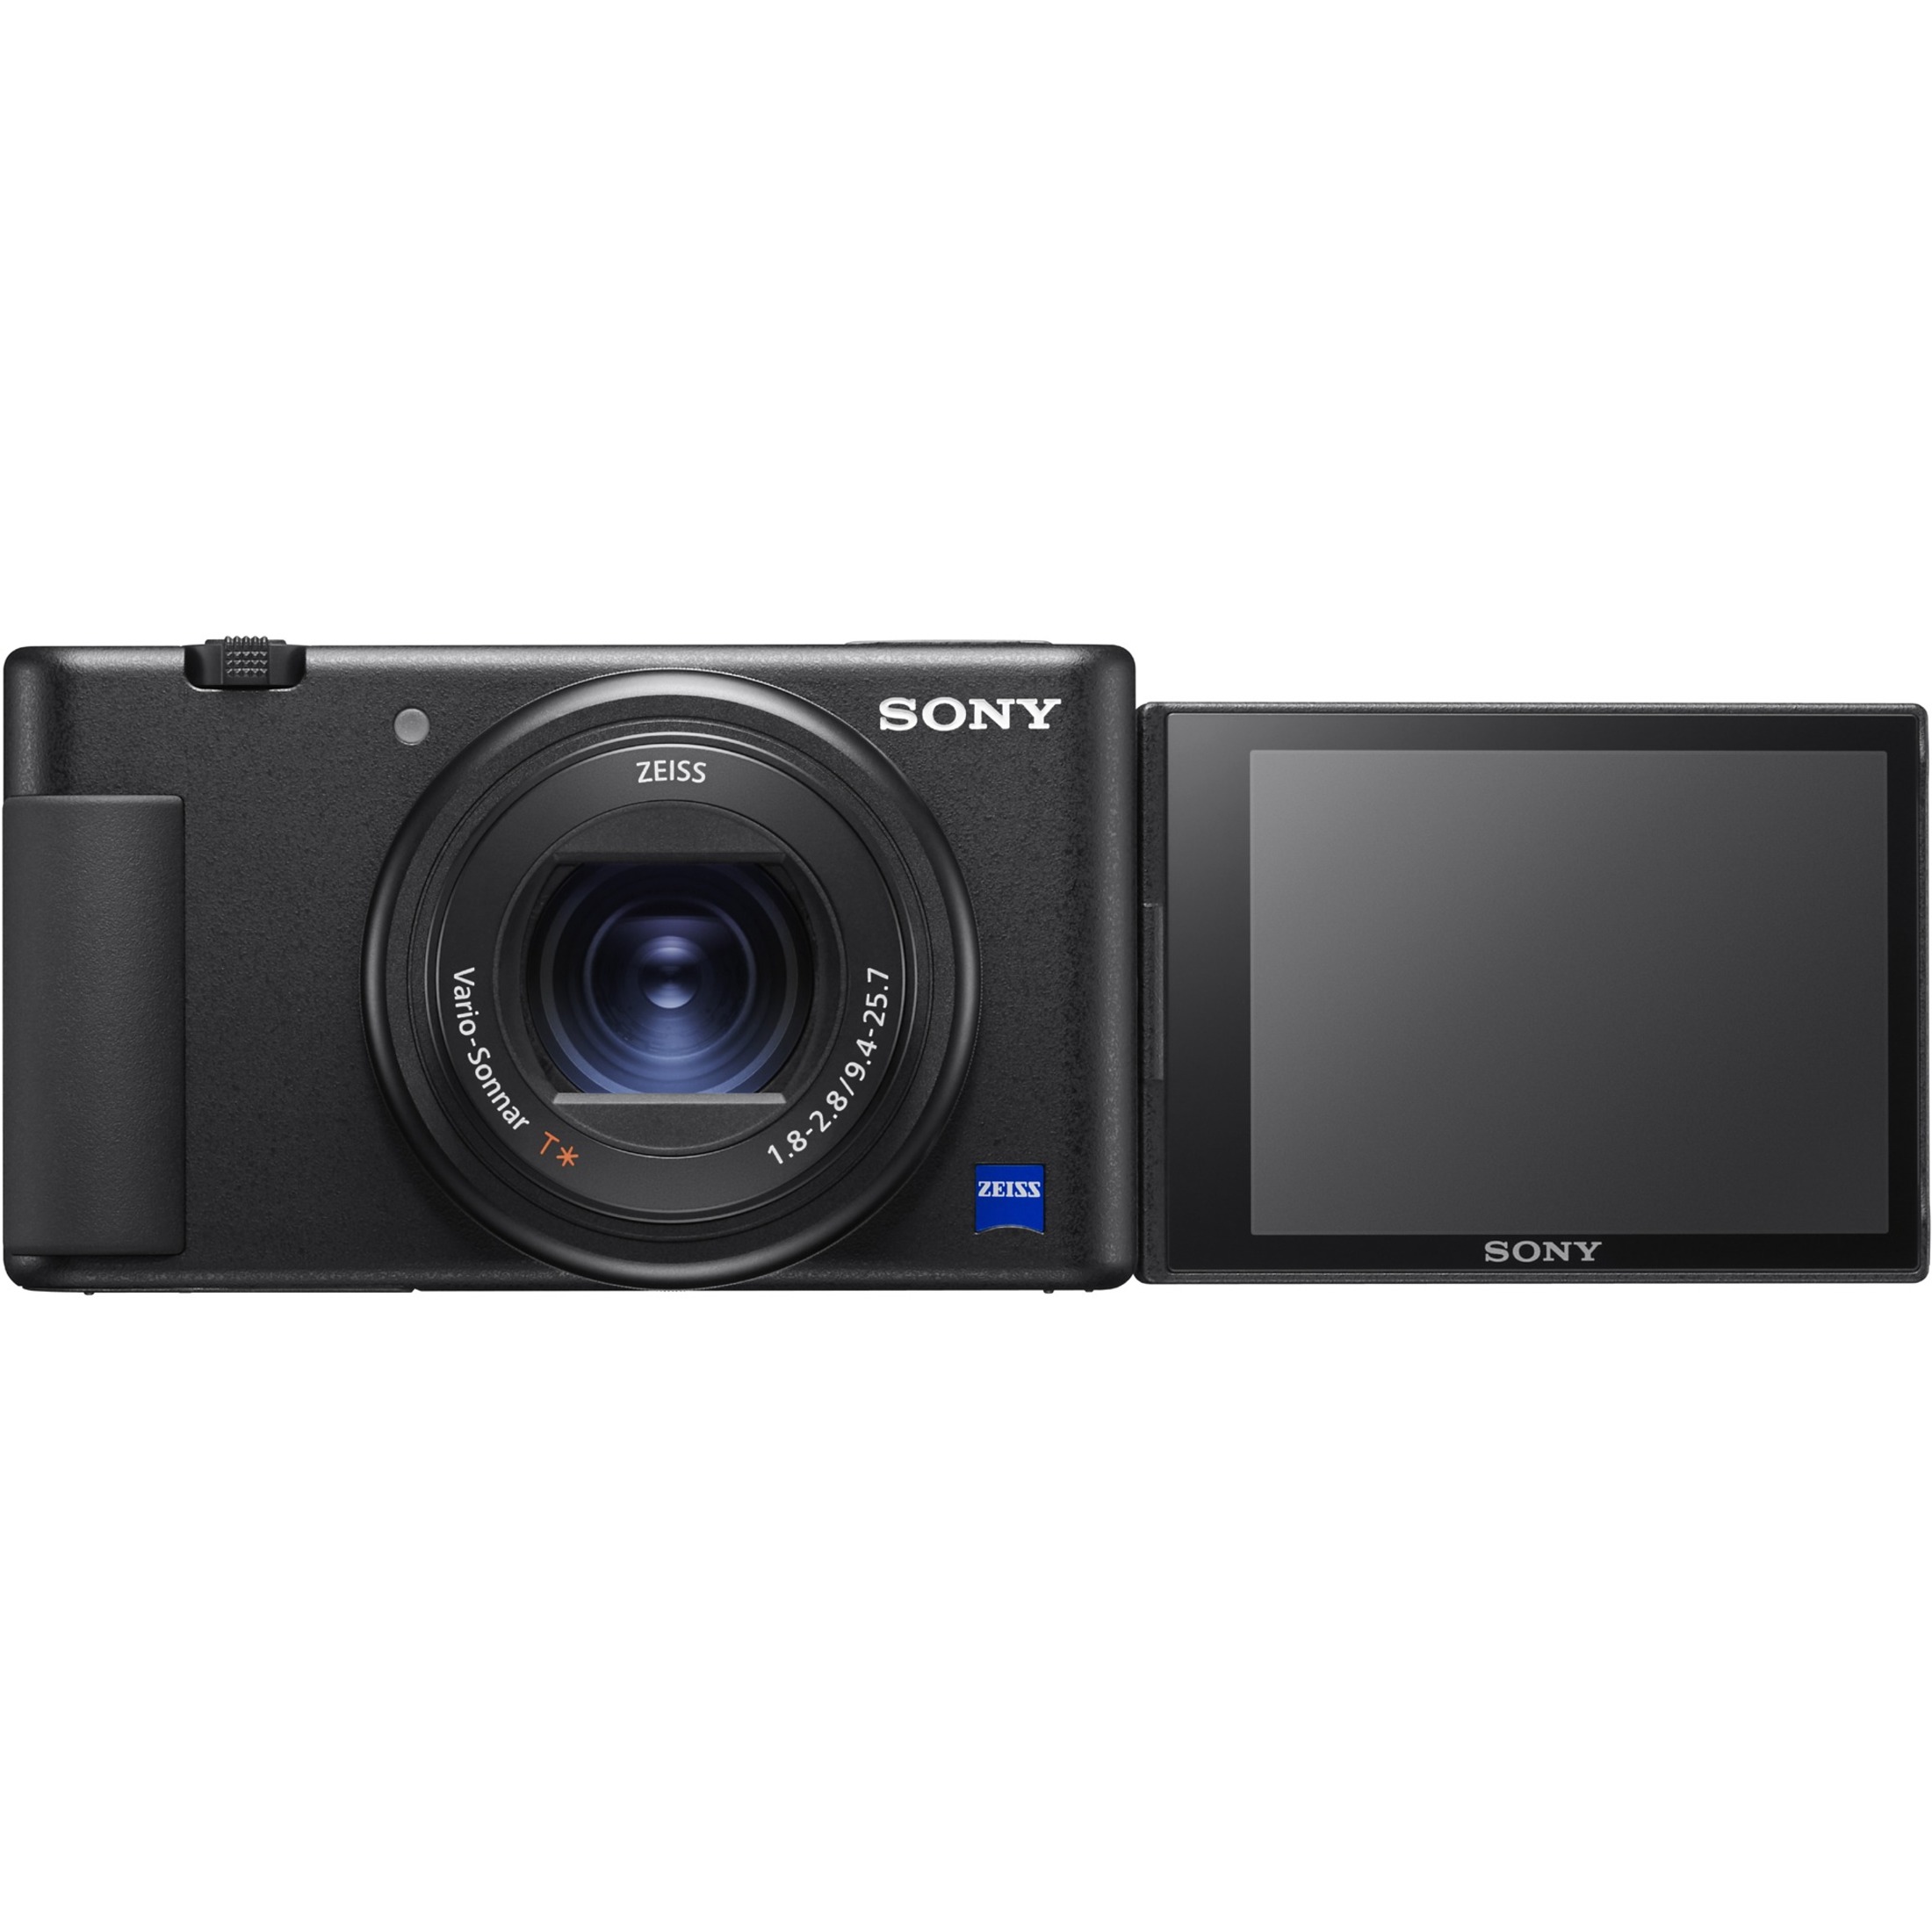 Sony ZV-1 20.1 Megapixel Compact Camera, Black - image 12 of 29